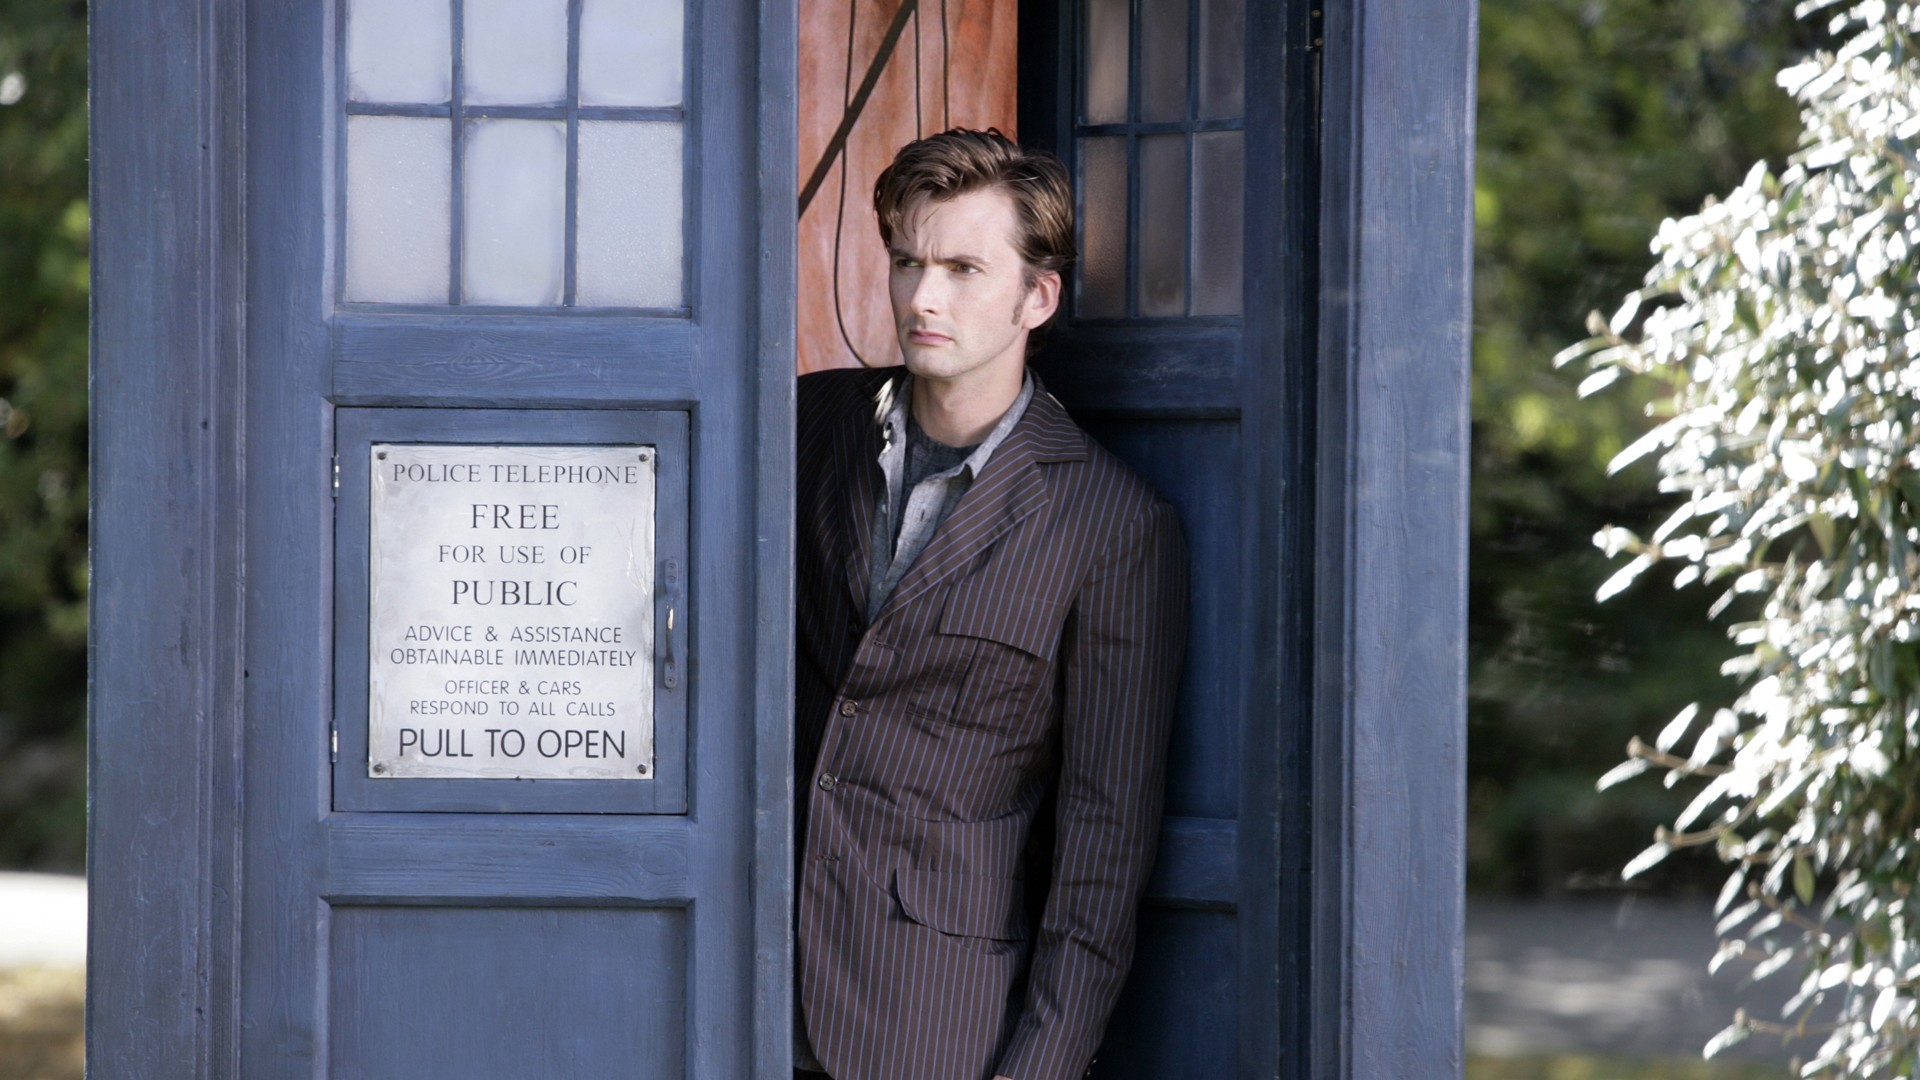 Doctor Who, The Doctor, David Tennant, Tenth Doctor, TARDIS Wallpapers HD / Desktop and Mobile Backgrounds